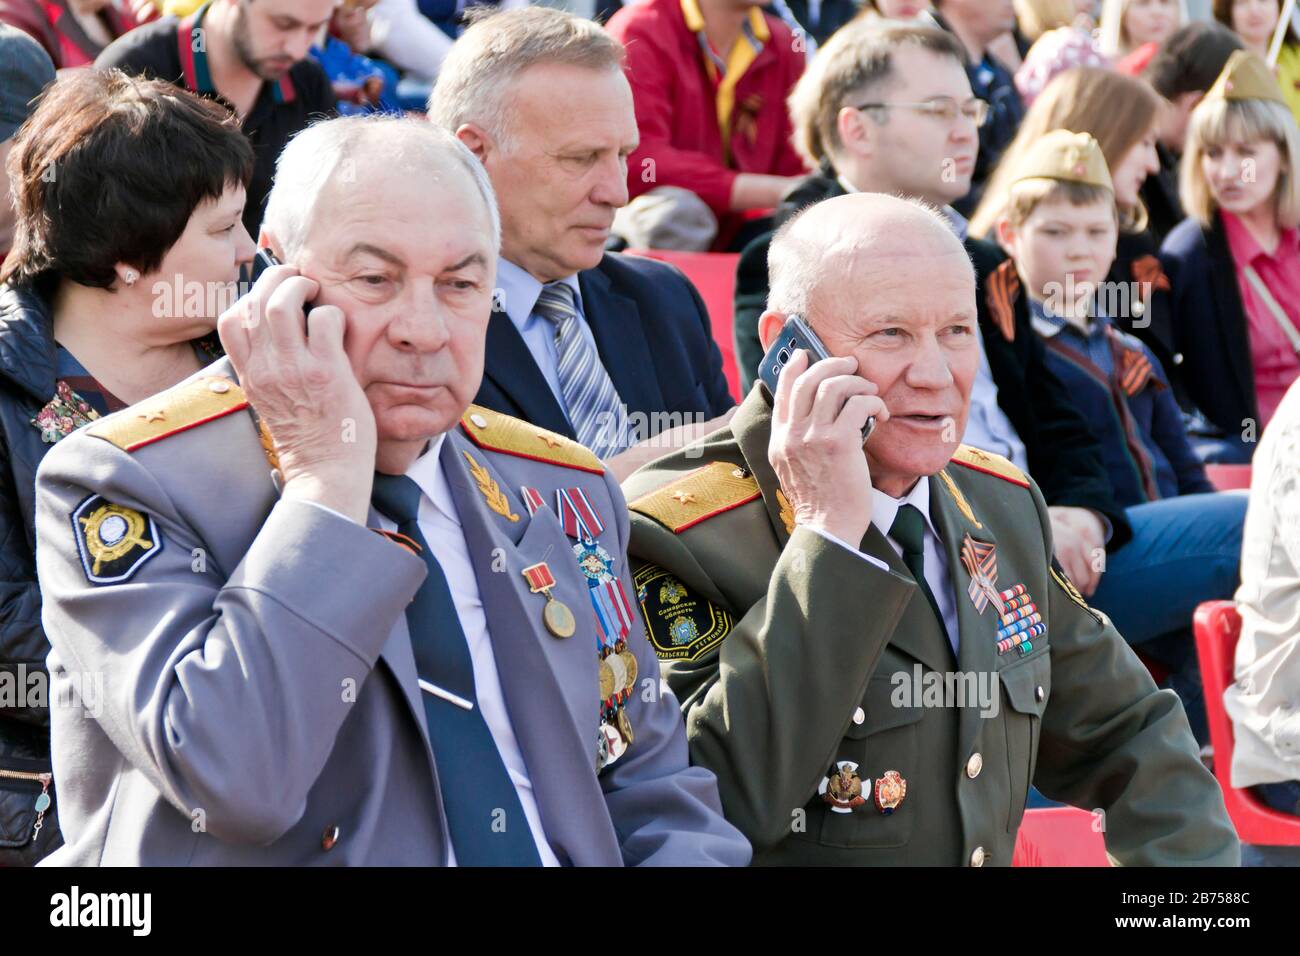 SAMARA, RUSSIA - MAY 9, 2017: Russian general on celebration at the parade on annual Victory Day, May, 9, 2017 in Samara, Russia Stock Photo